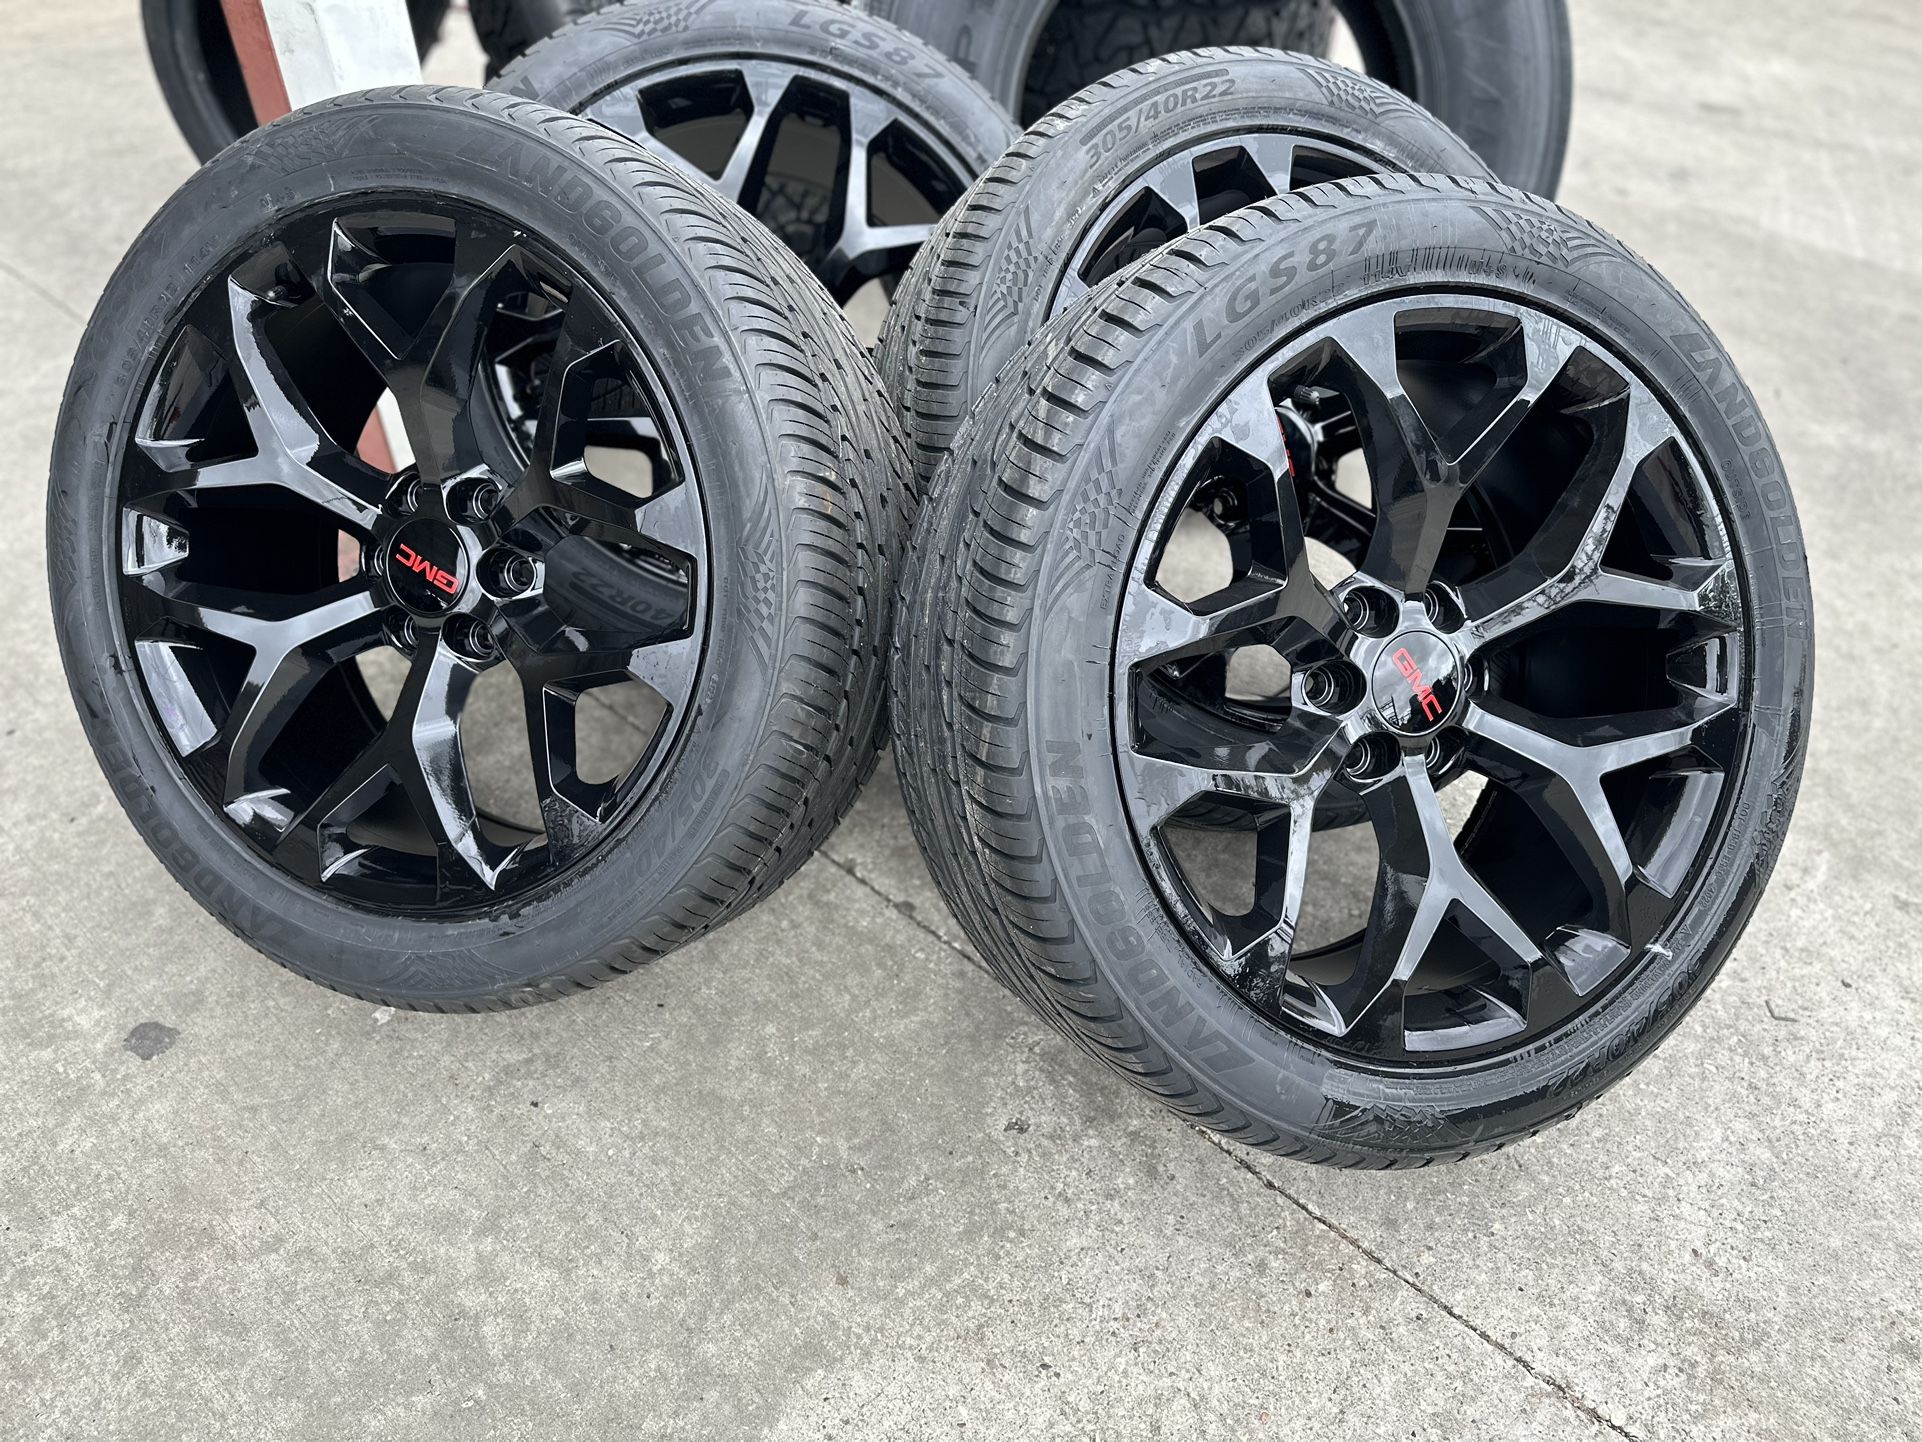 22” Snowflakke Gloss Black With Tires